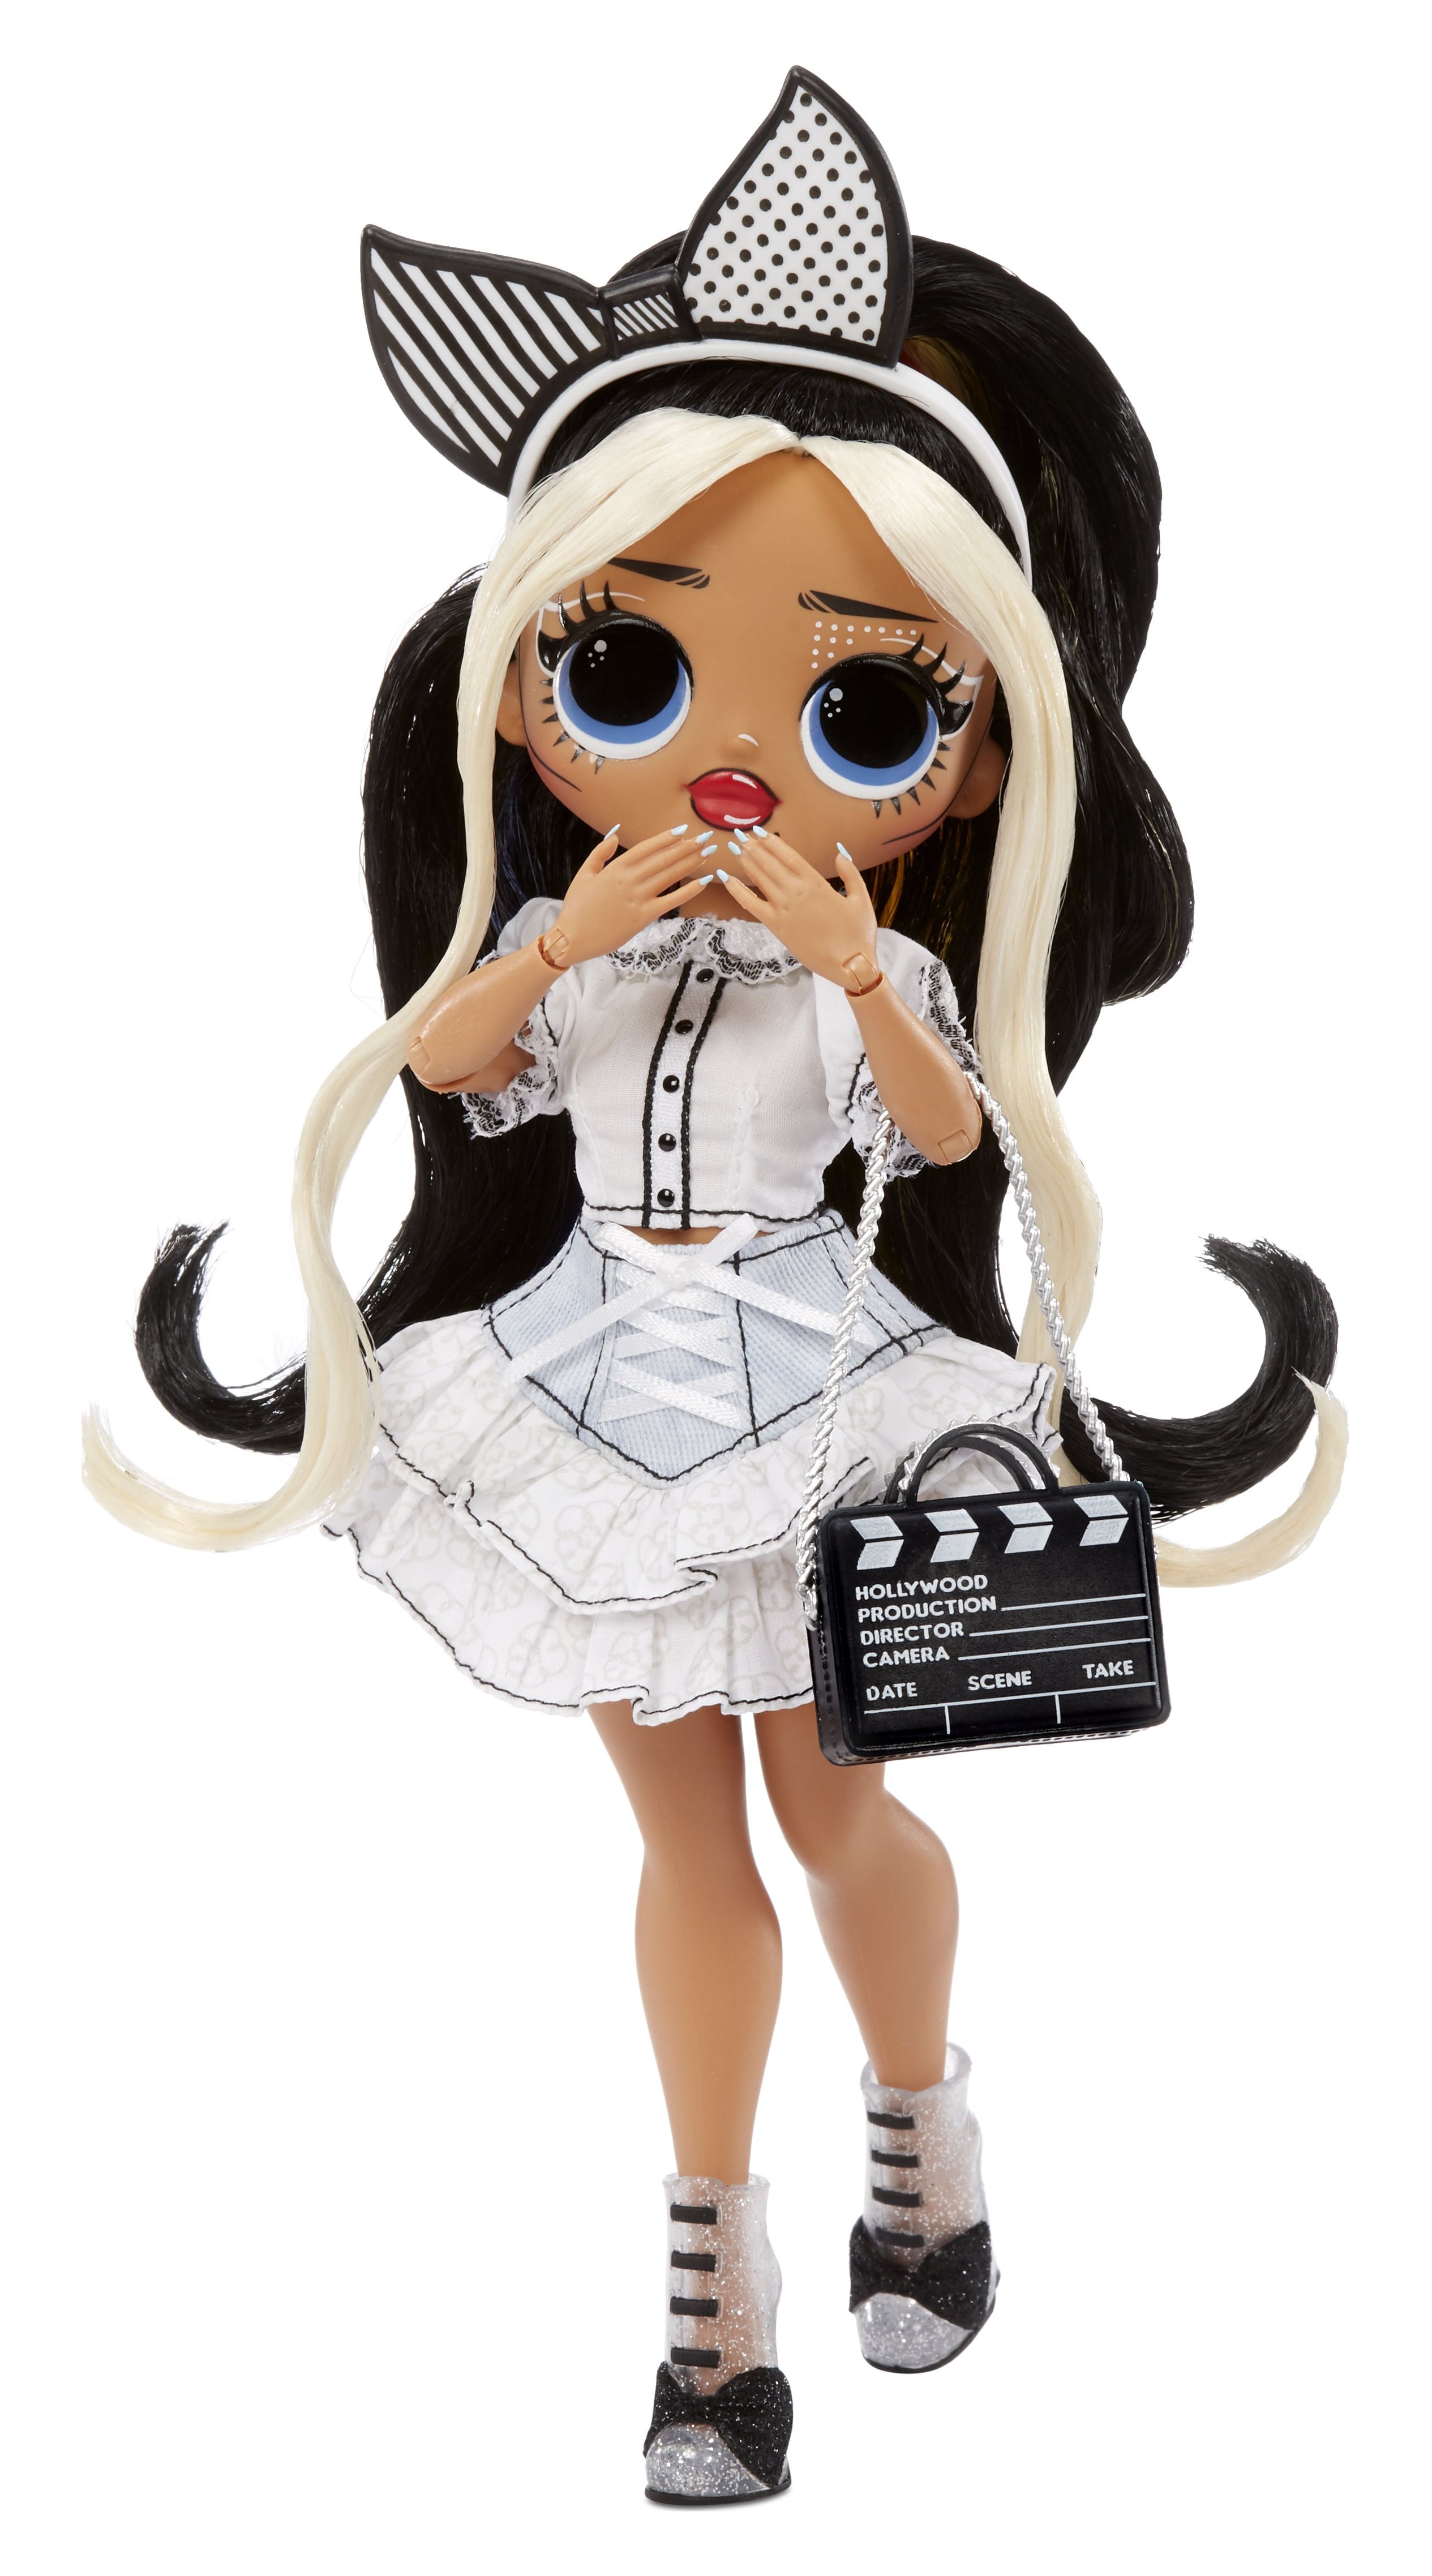 LOL Surprise OMG Movie Magic™ Starlette Fashion Doll With 25 Surprises Including 2 Fashion Outfits, 3D Glasses, Movie Playset - Toys for Girls Ages 4 5 6+ - image 1 of 7